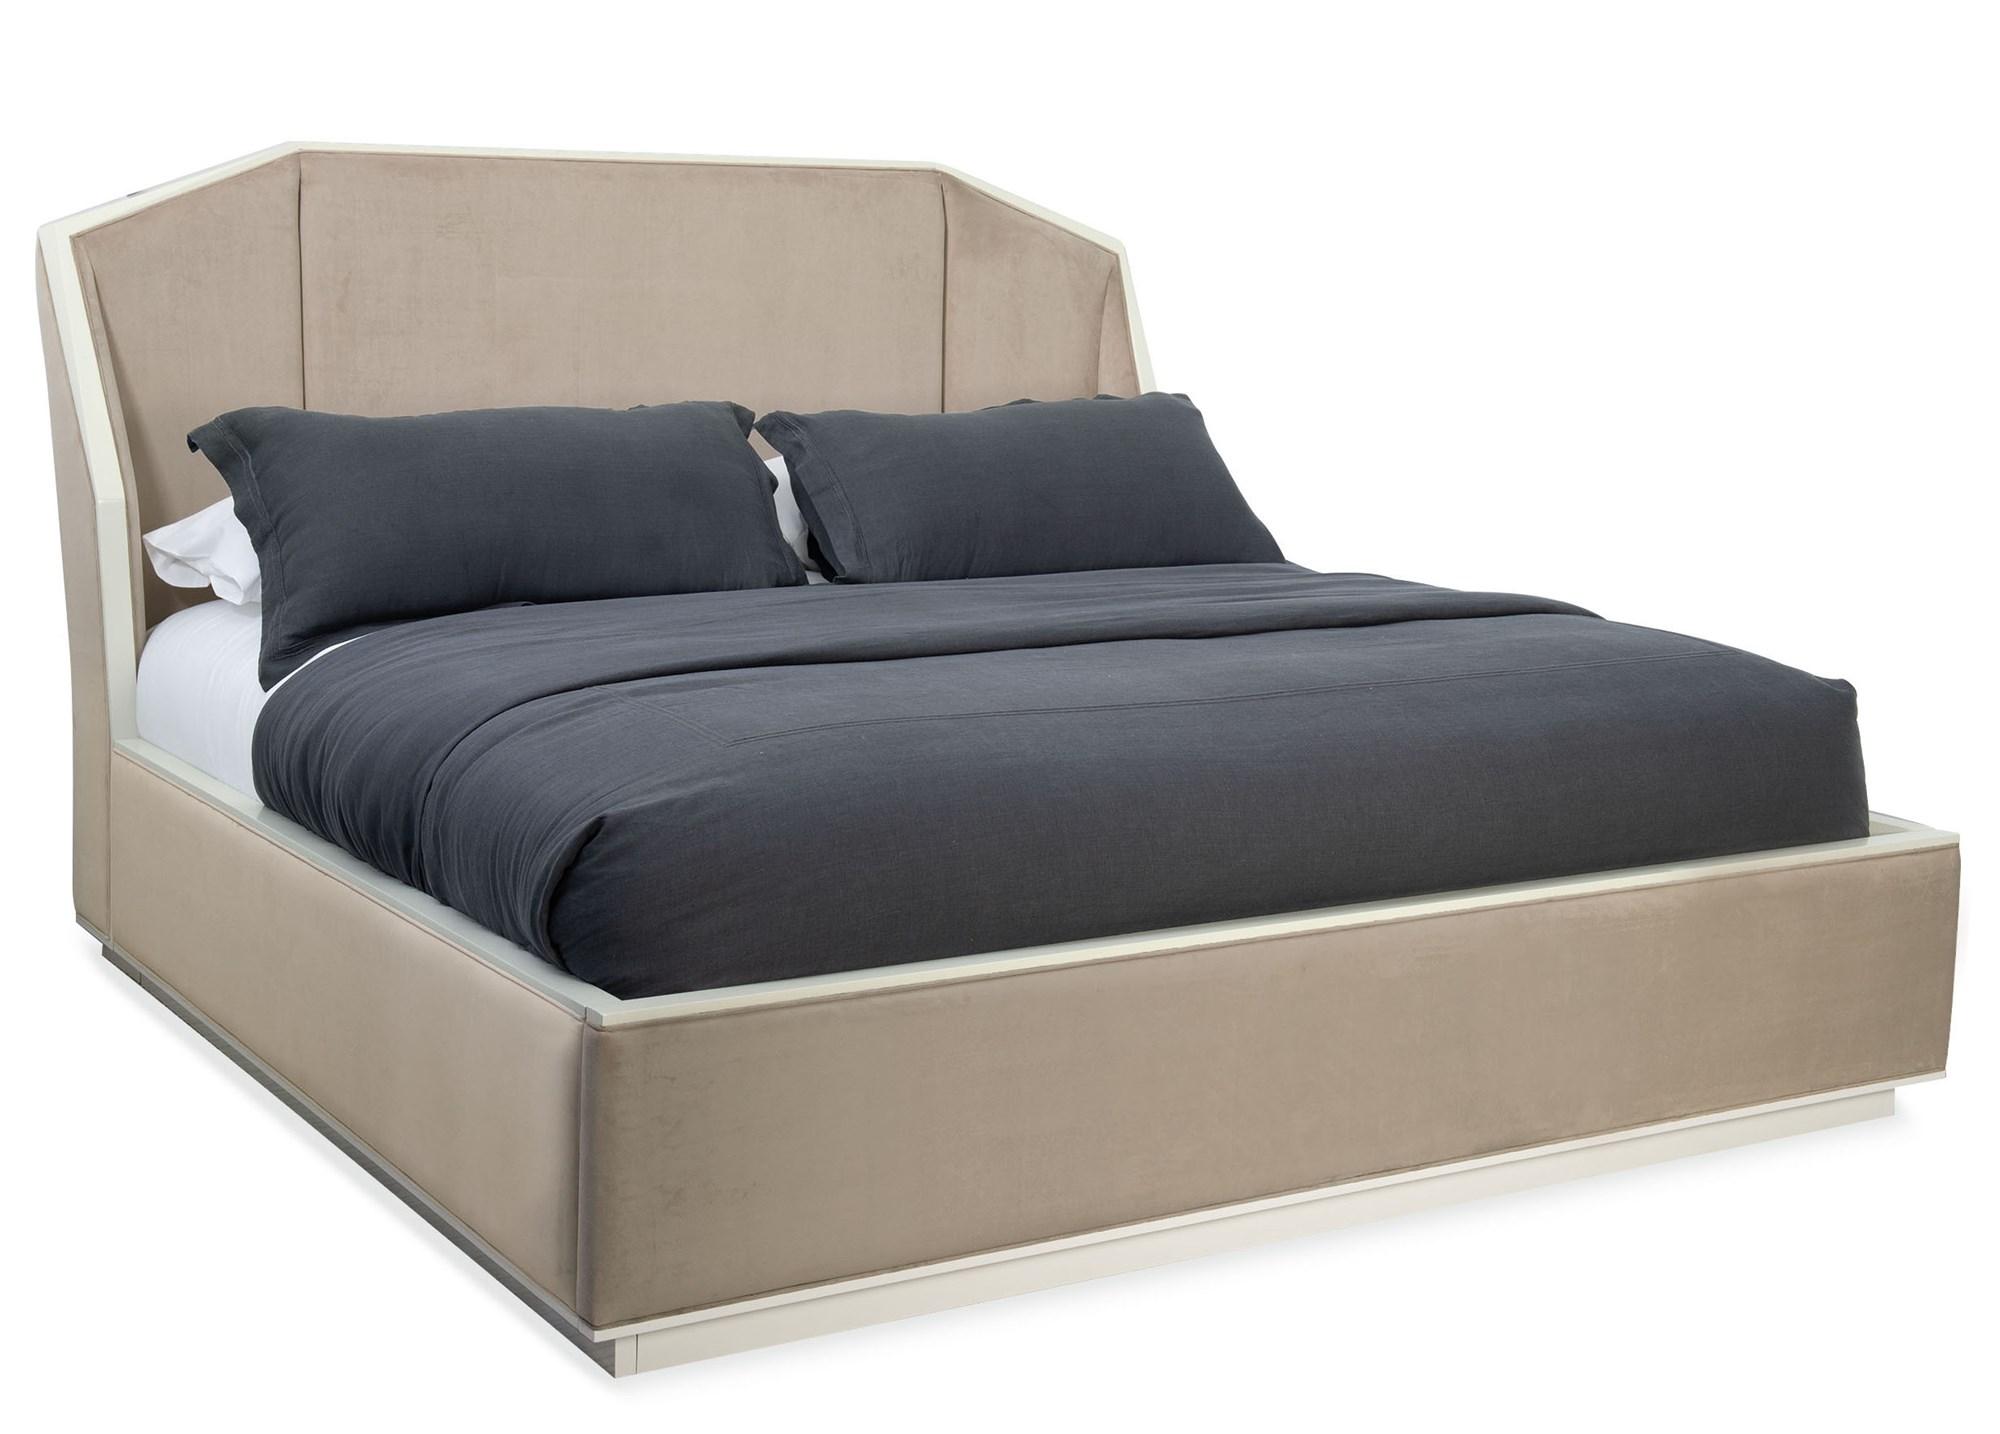 Contemporary Platform Bed EXPRESSIONS UPH BED M123-420-102 in Mocha Fabric